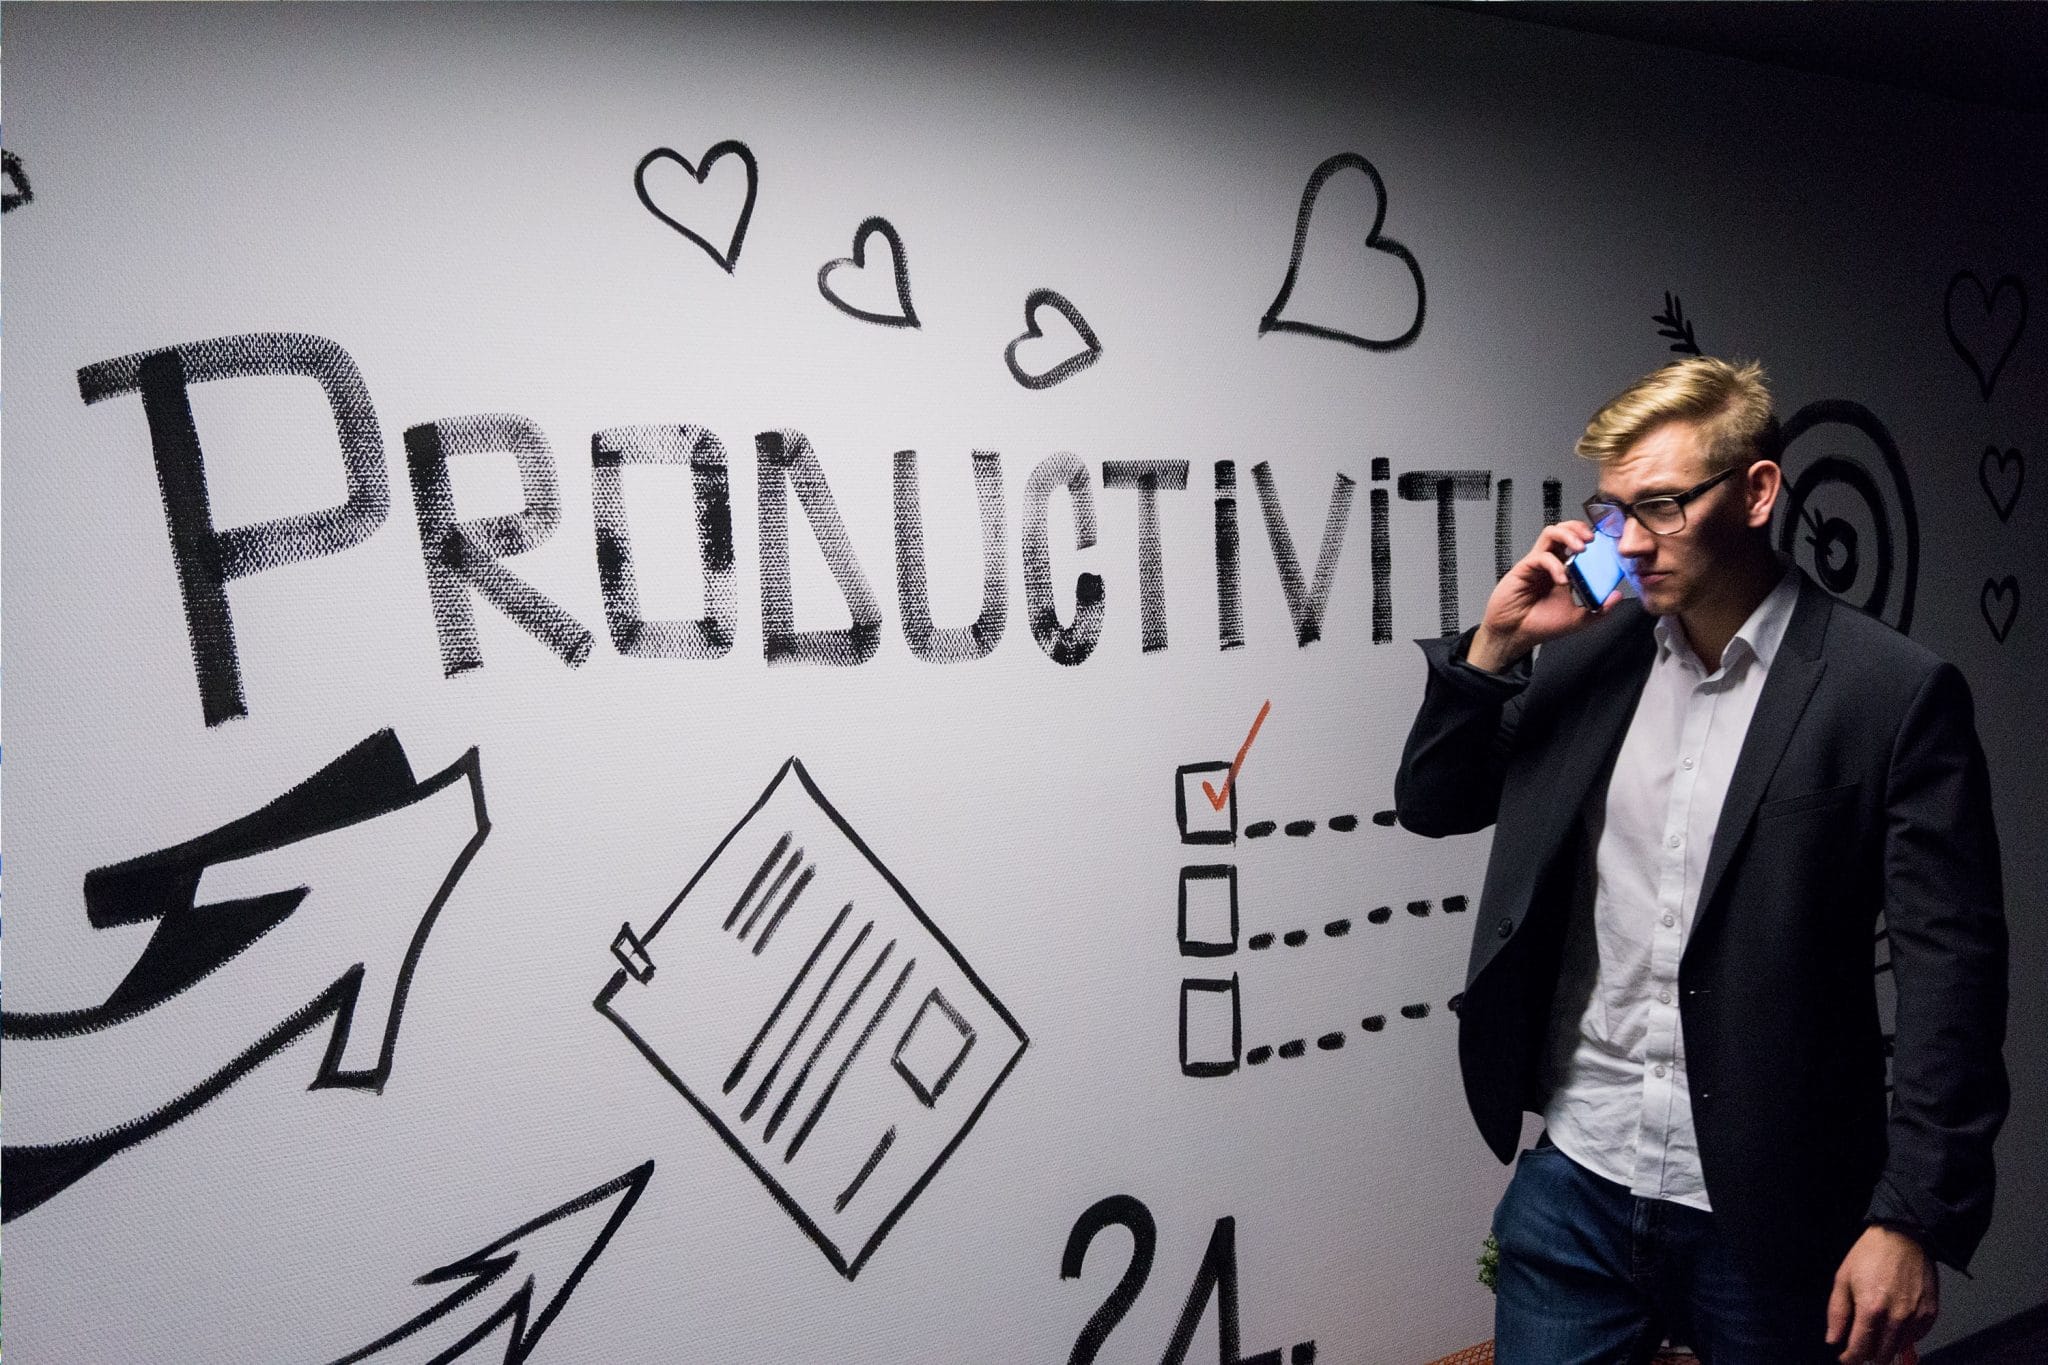 Photo of a blonde man in suit wearing glasses taken as he talks on his smartphone. In the background there is an white plasterboard with the word 'productivity' painted onto it, along with shapes of hearts and other symbols.